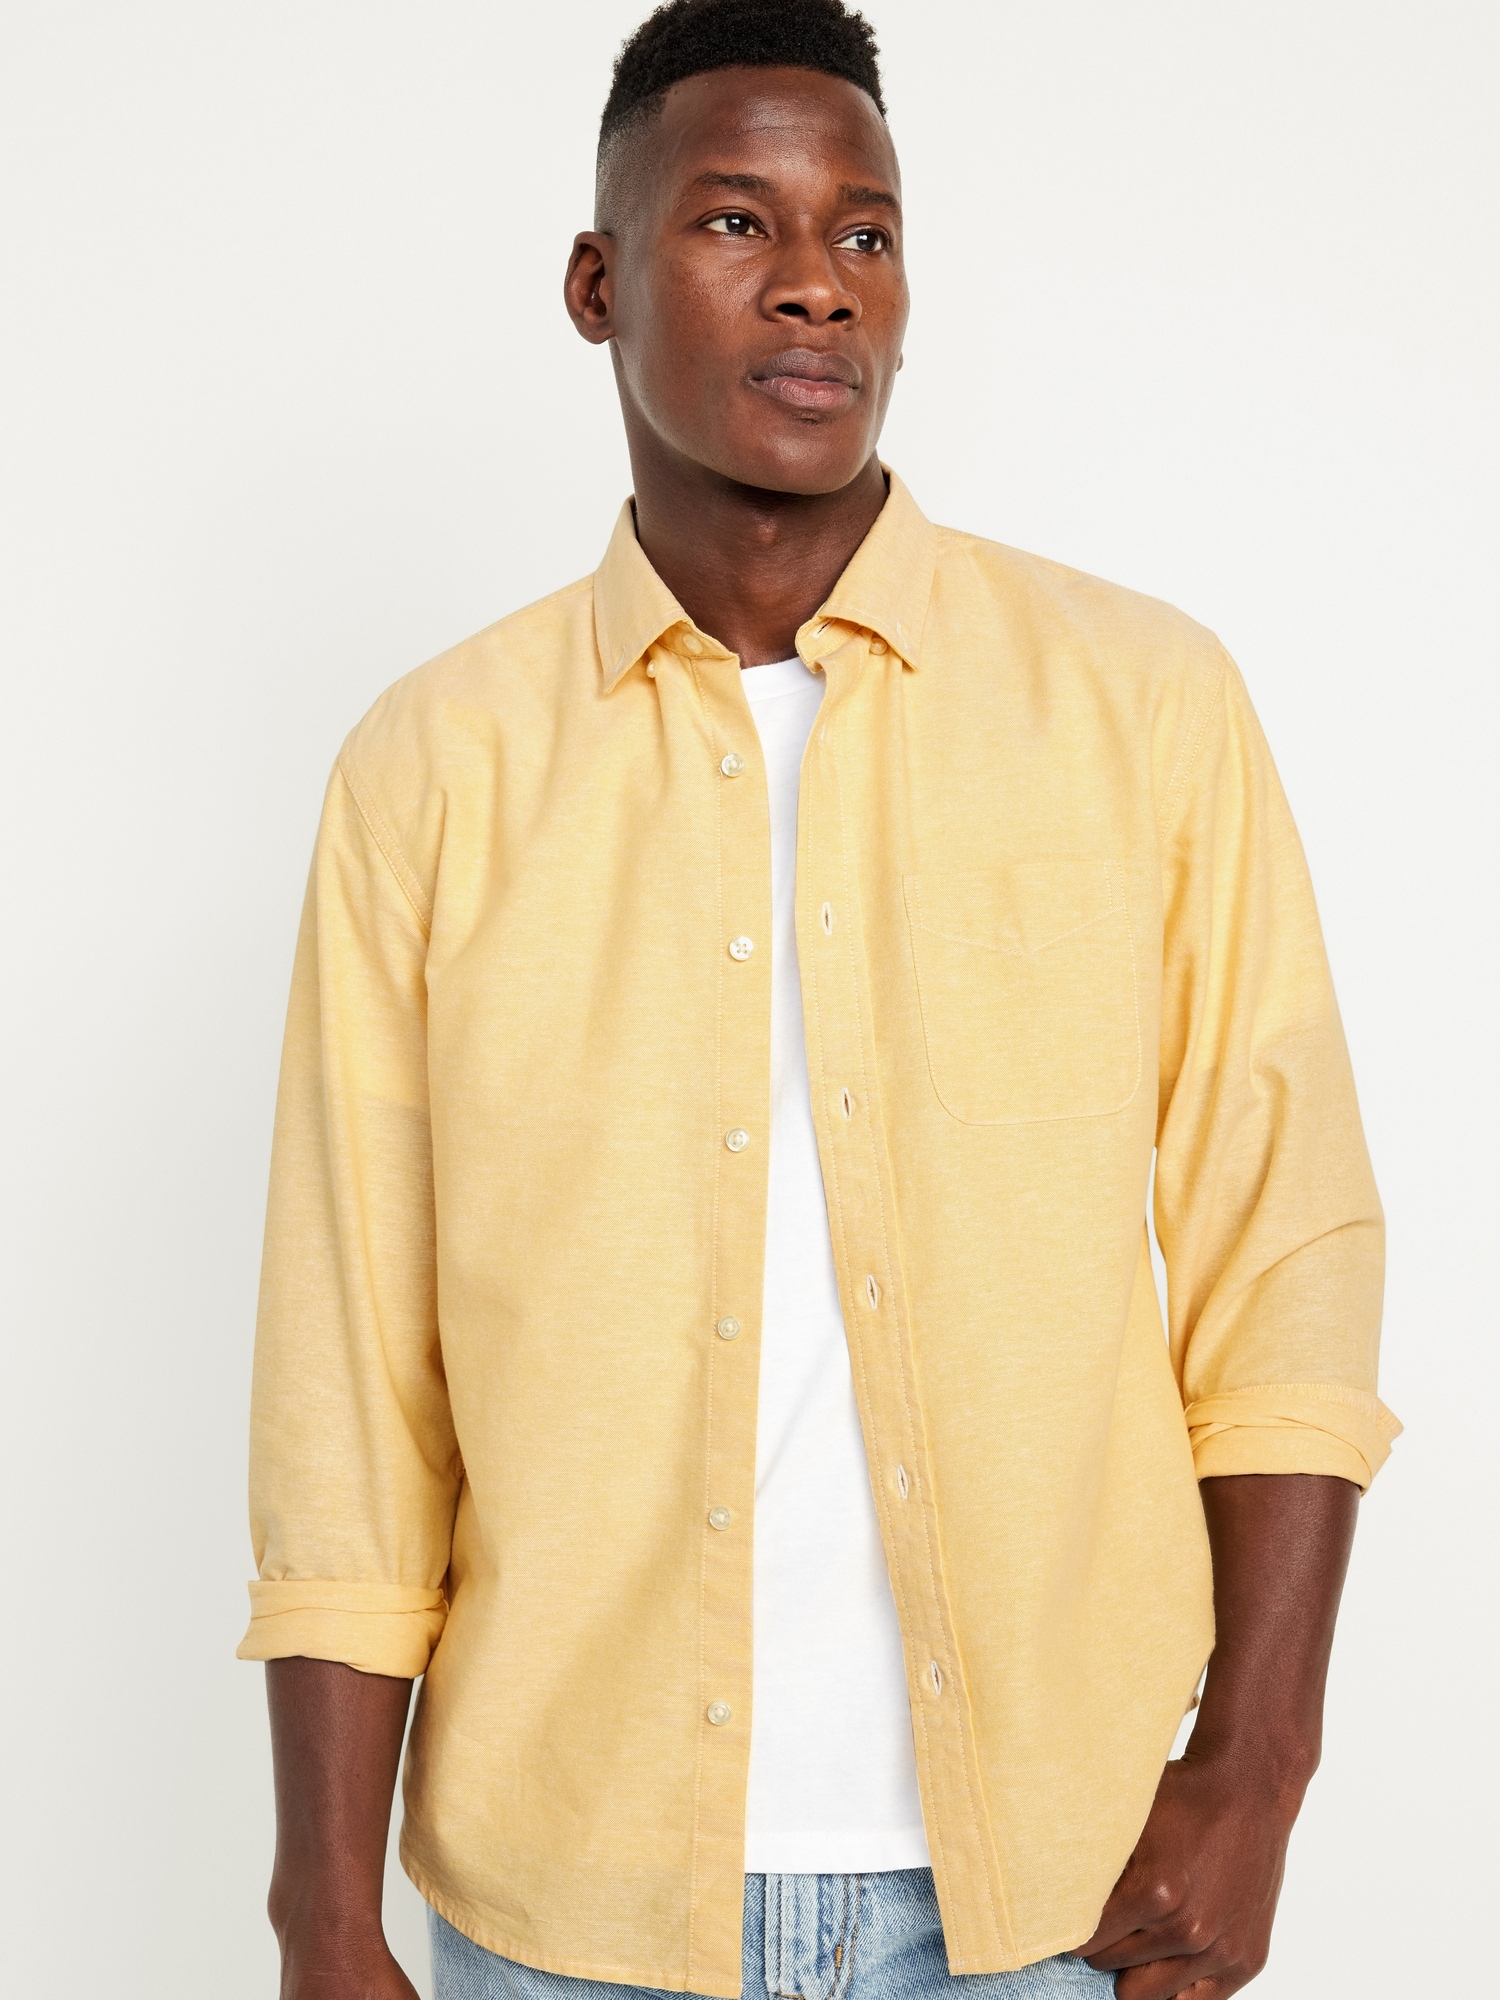 Classic Fit Everyday Oxford Shirt